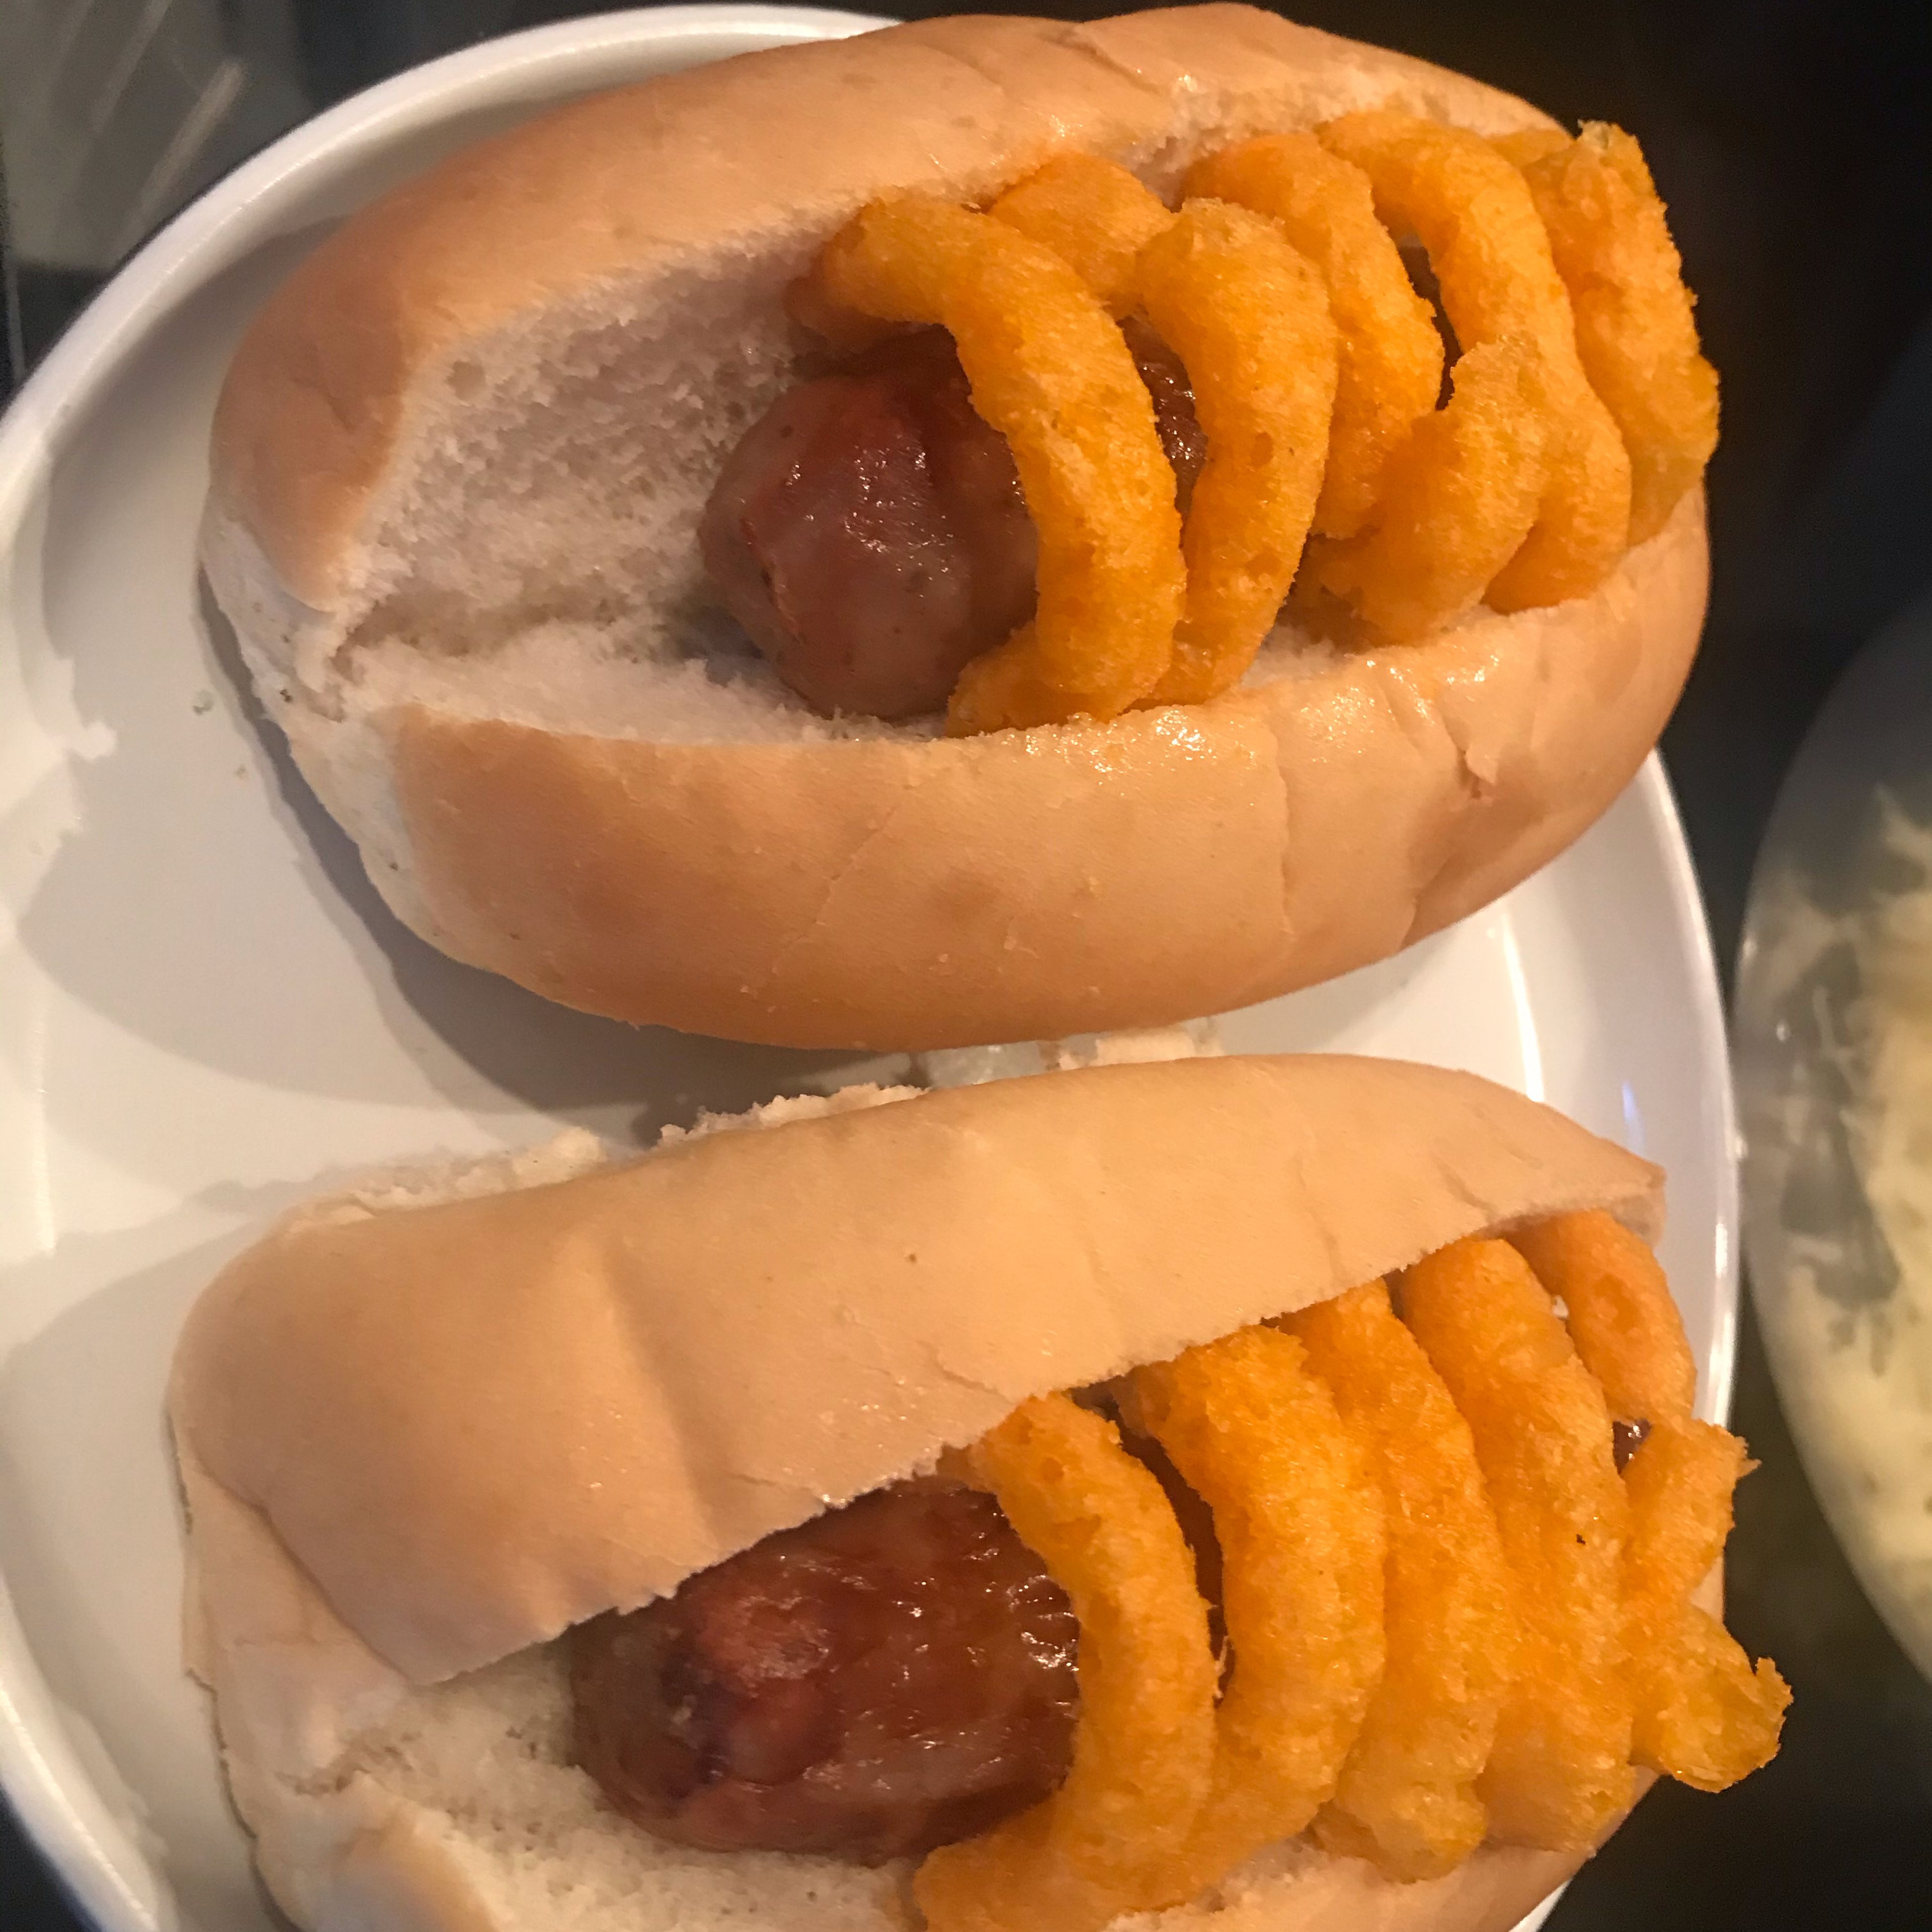 Once cooked place the onion rings around the sausages. Spread each hot dog bun and place one sausage in each one.